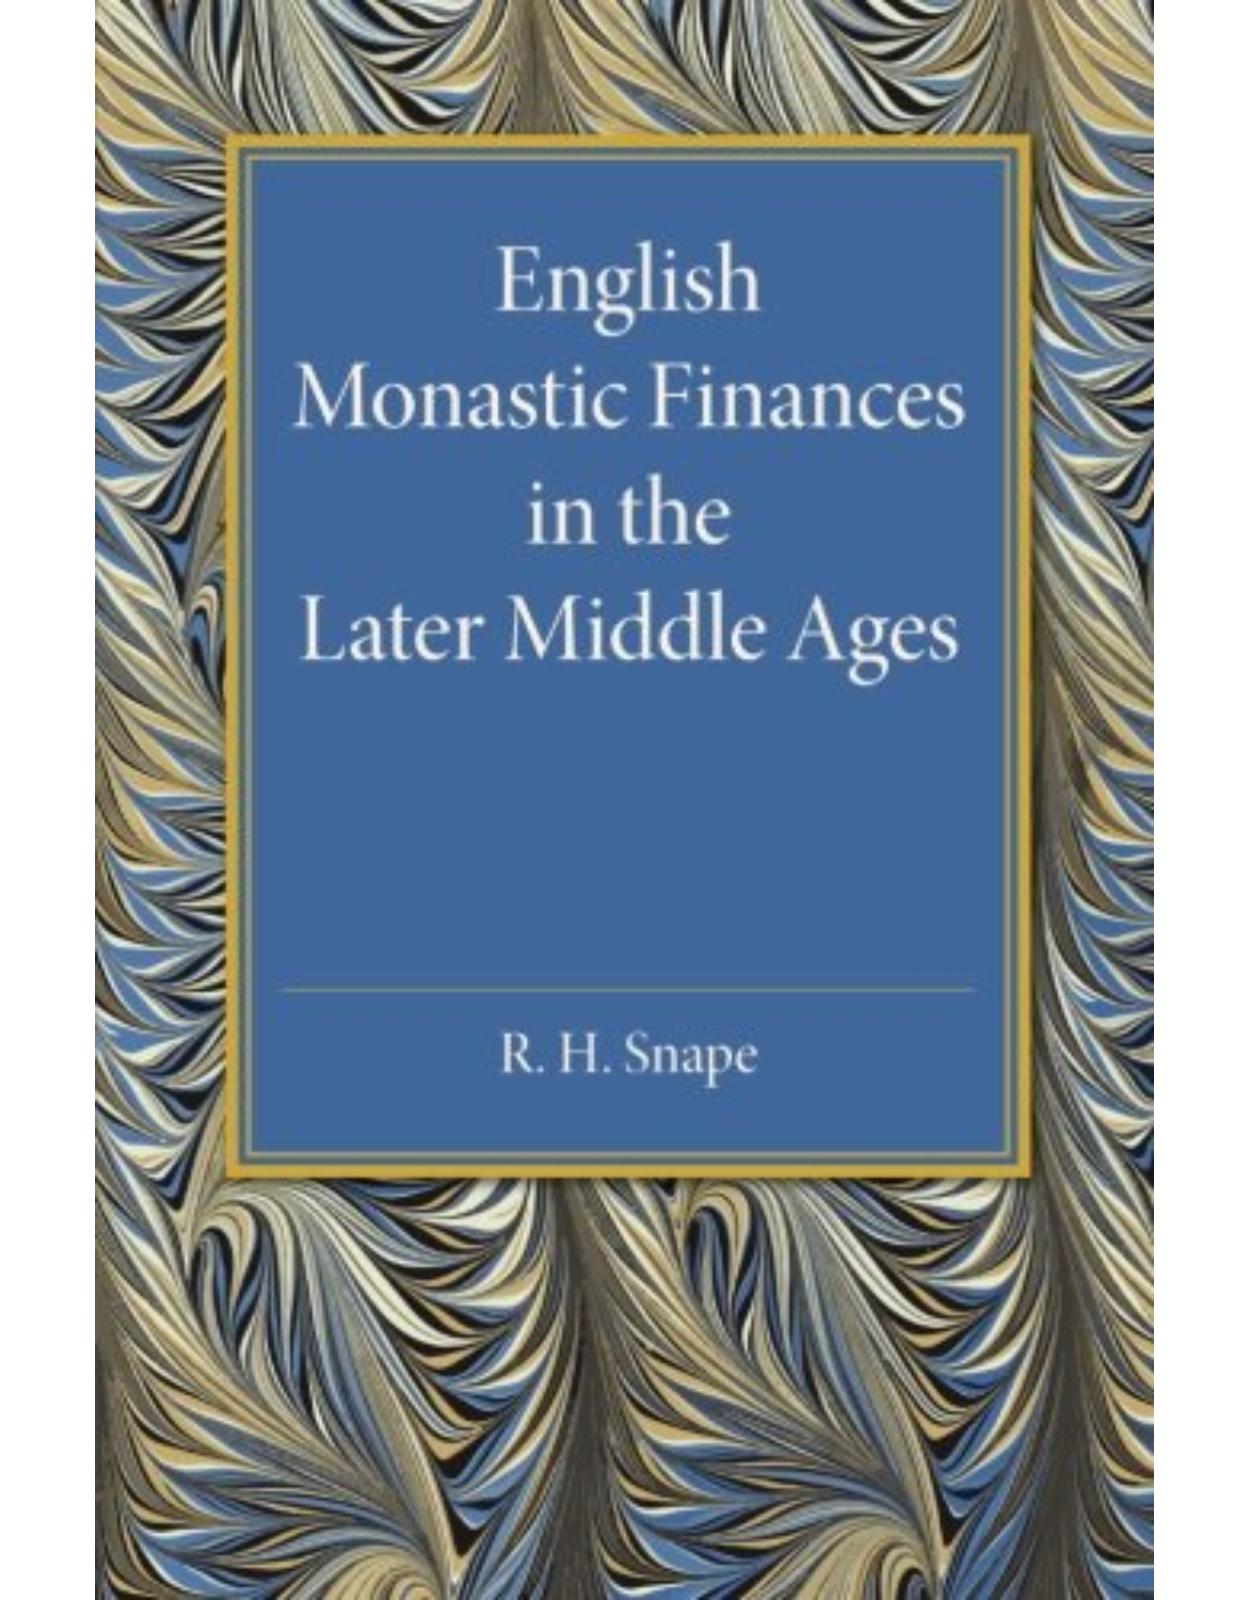 English Monastic Finances in the Later Middle Ages